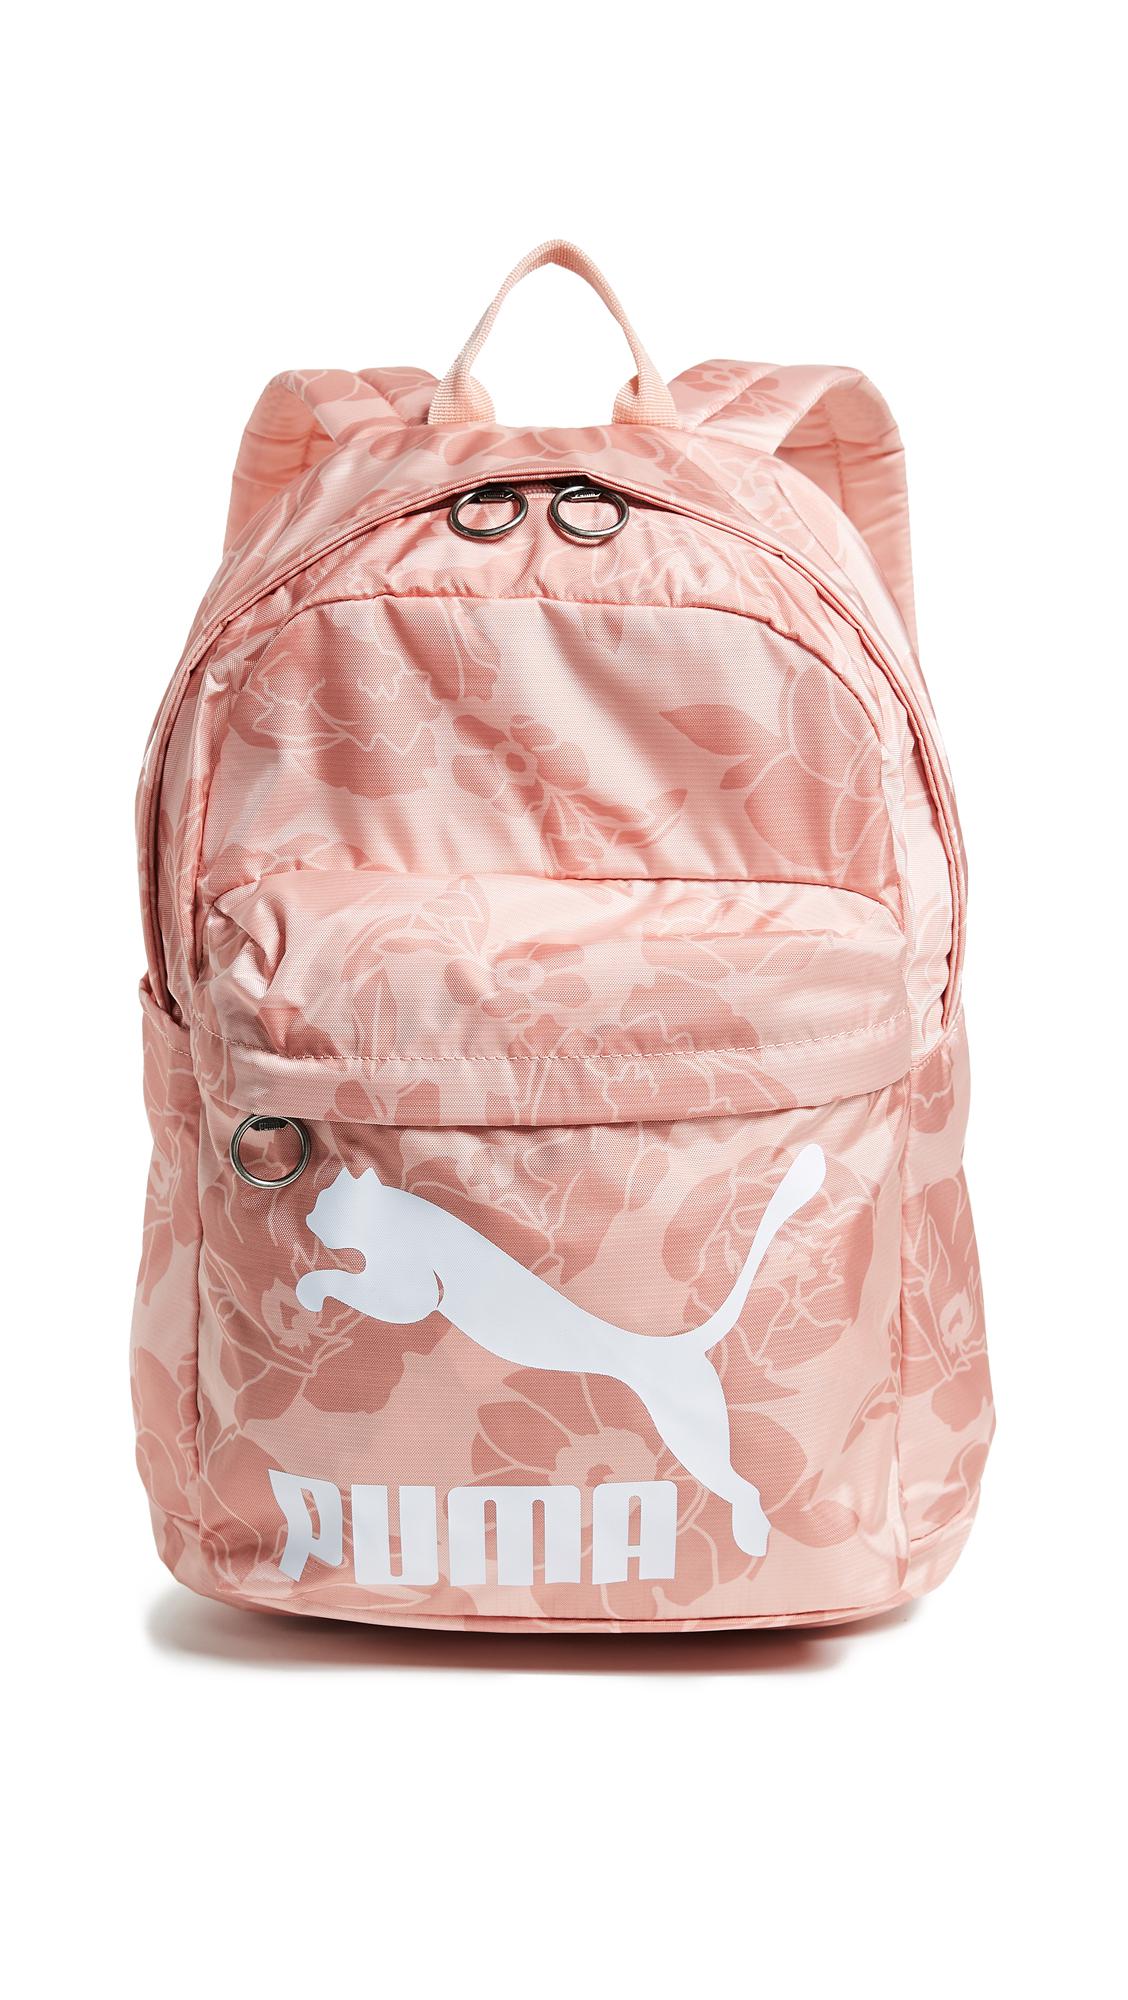 PUMA Synthetic Originals Backpack Rucksack in Light Pastel Pink (Pink) -  Lyst